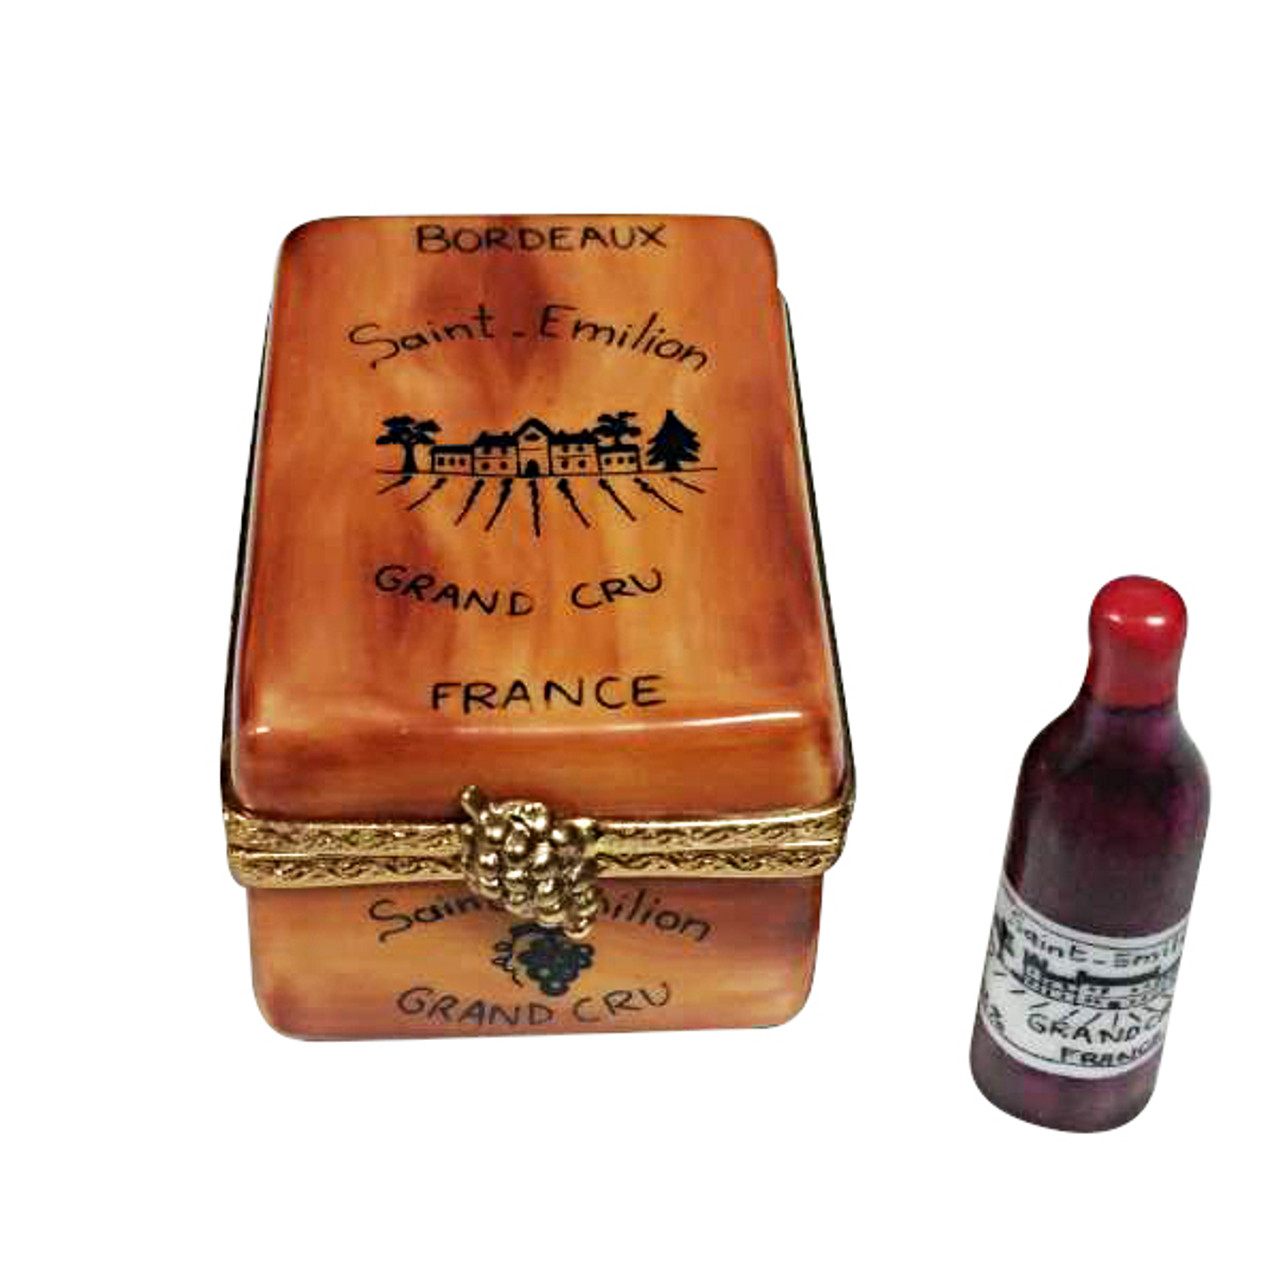 BOURDEAUX TASTING CRATE WITH 1 BOTTLE, 1 GLASS AND CORK SCREW Limoges Box RW092-L